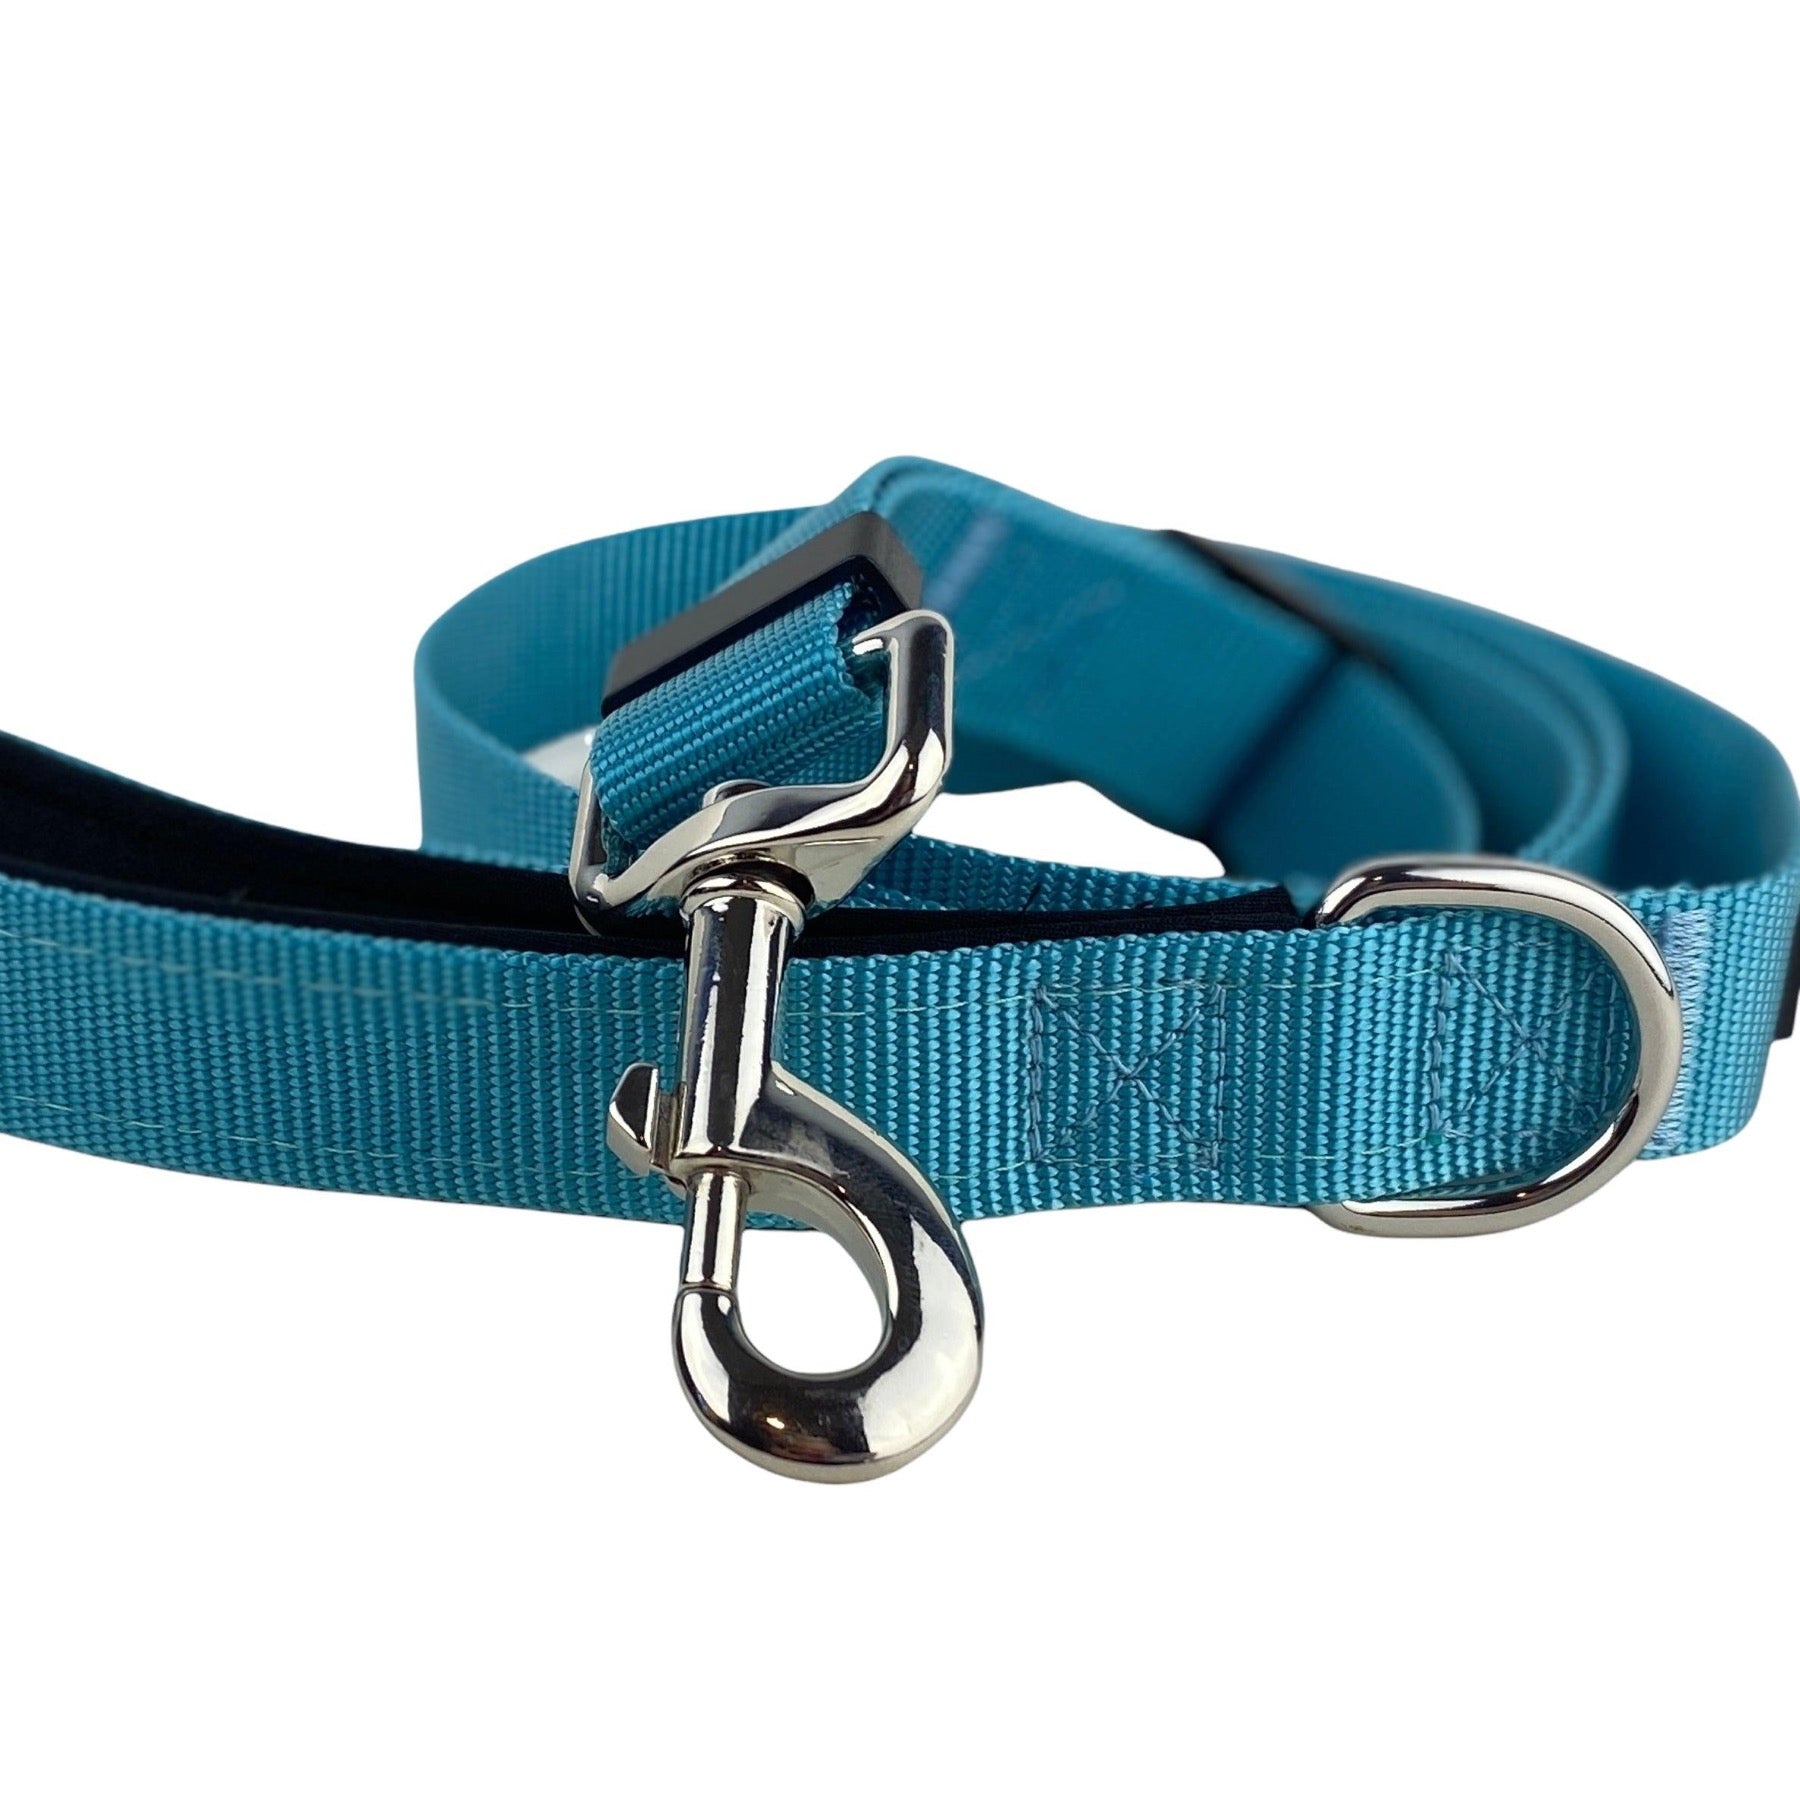 photo of a teal dog leash by fearless pet